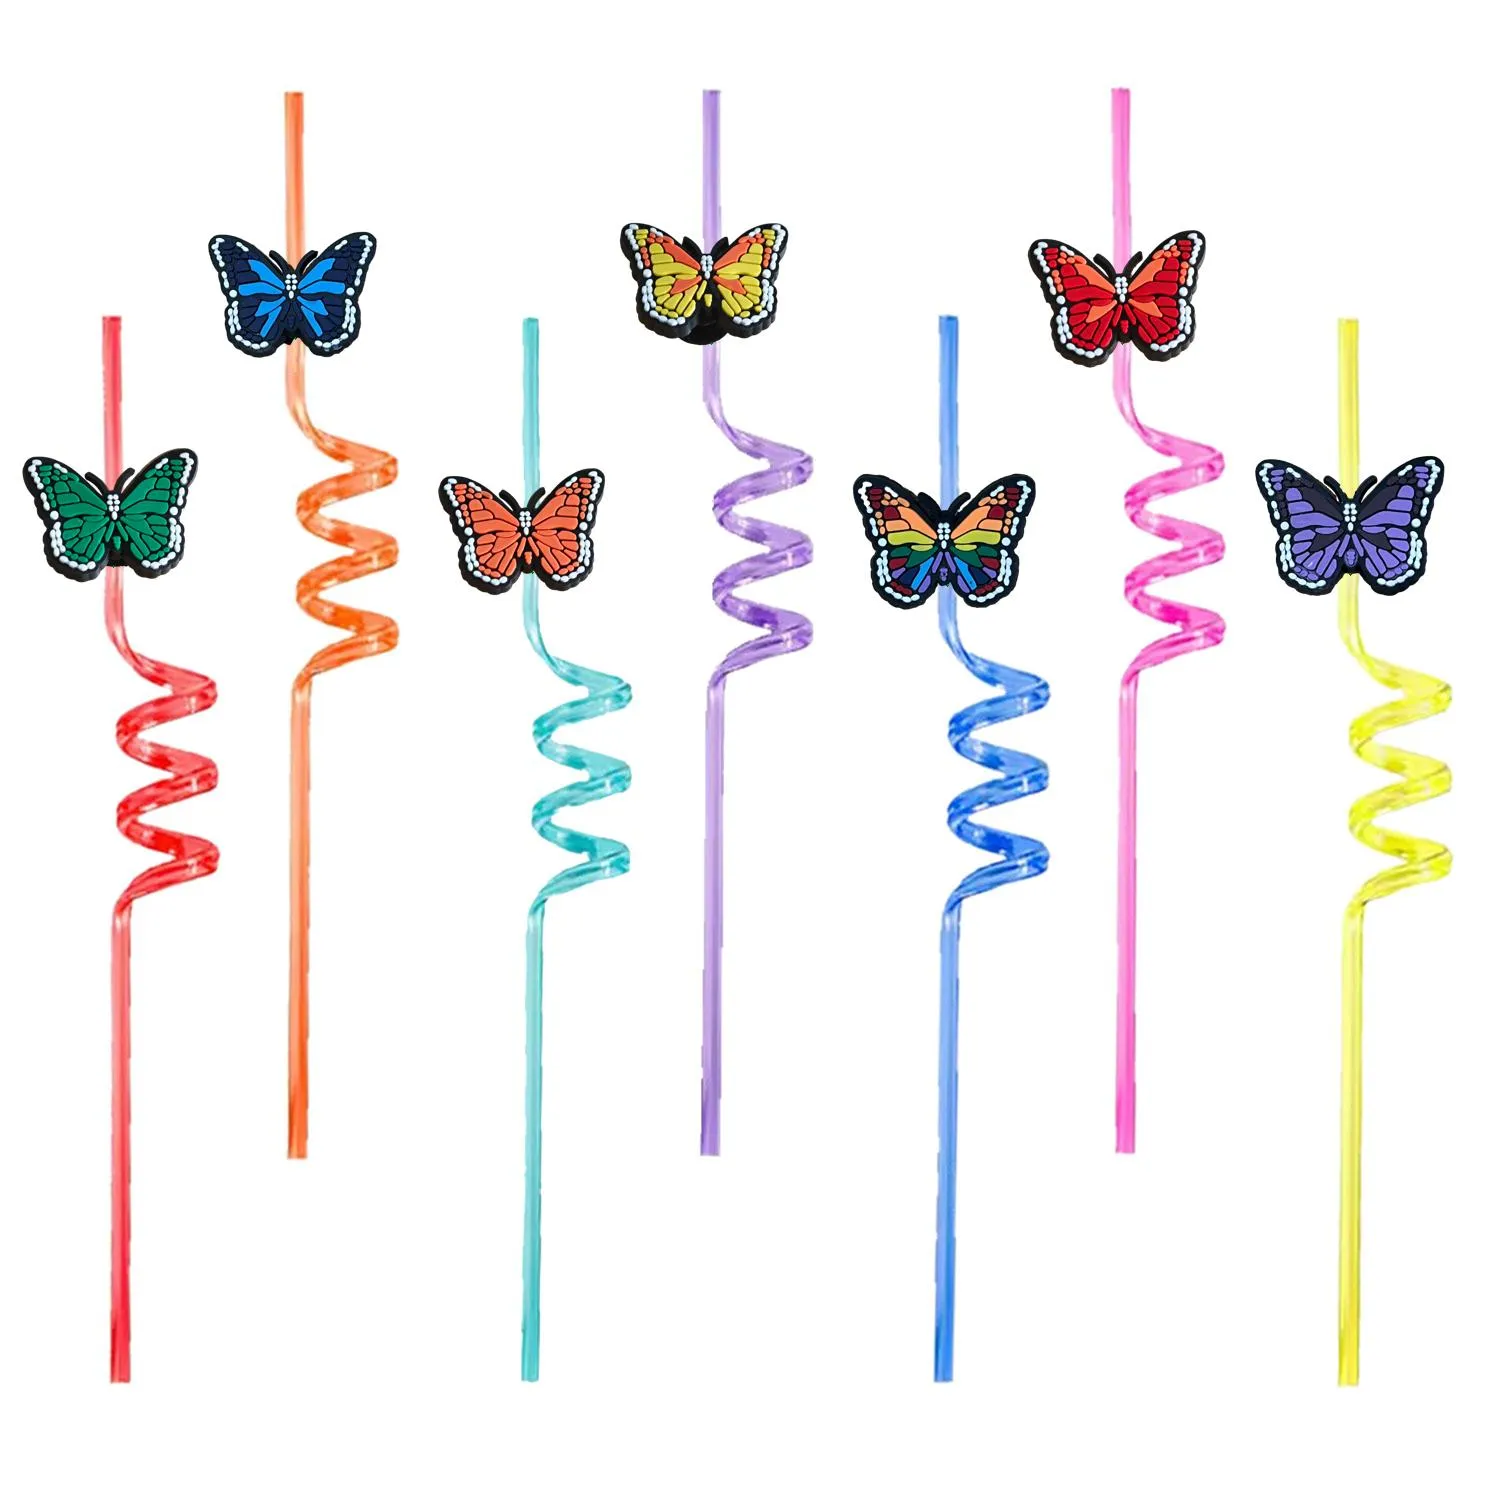 Dricker STS Butterfly tema Crazy Cartoon for Kids Goodie Gifts Party Plastic Birthday St Girls Decorations REURBEABLE Drop Delivery OTBP3